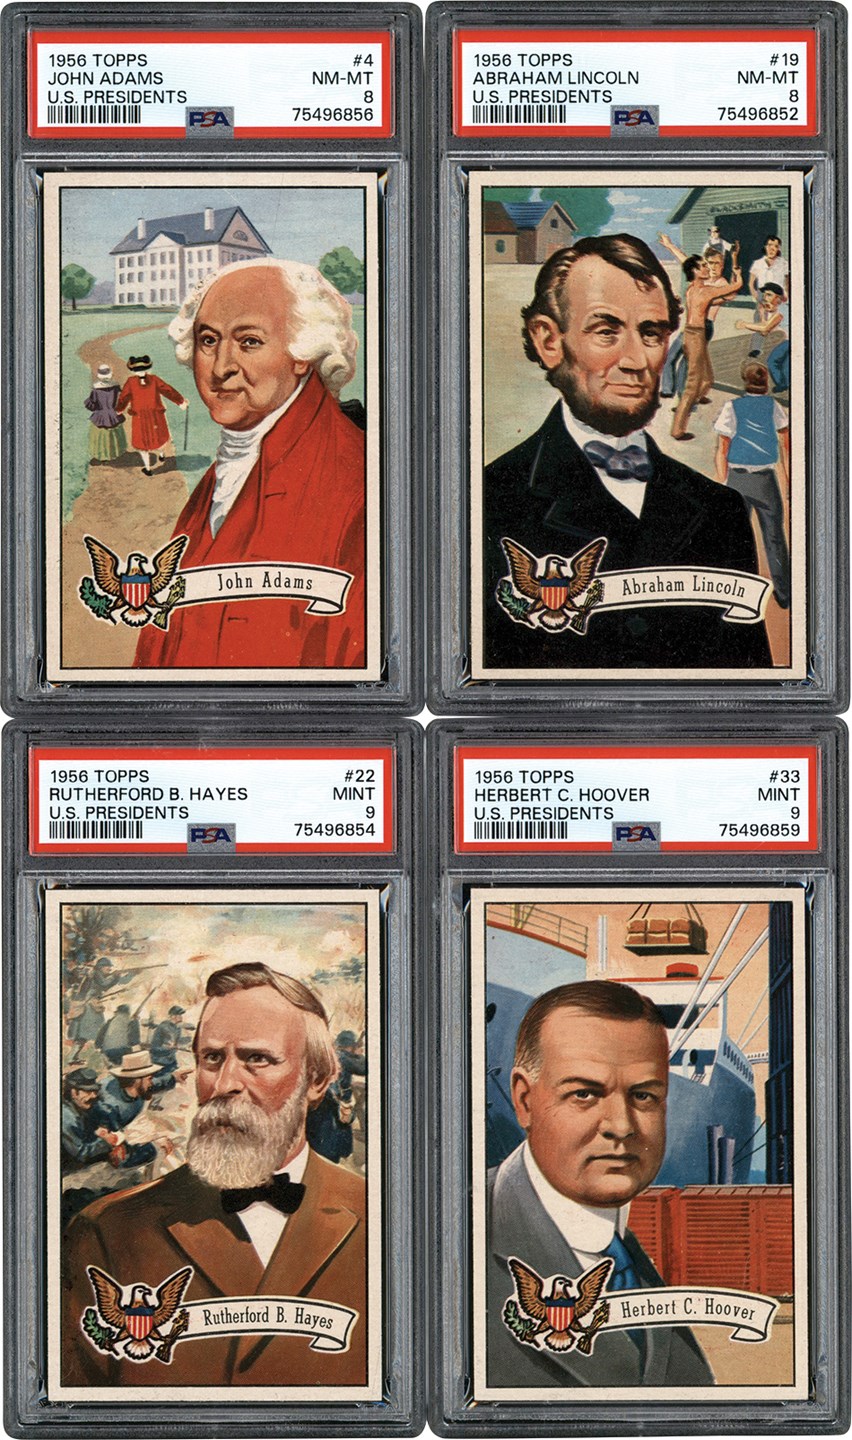 Non-Sports Cards - 1956 Topps U.S. Presidents High Grade PSA Collection w/Mint 9 Examples (13)